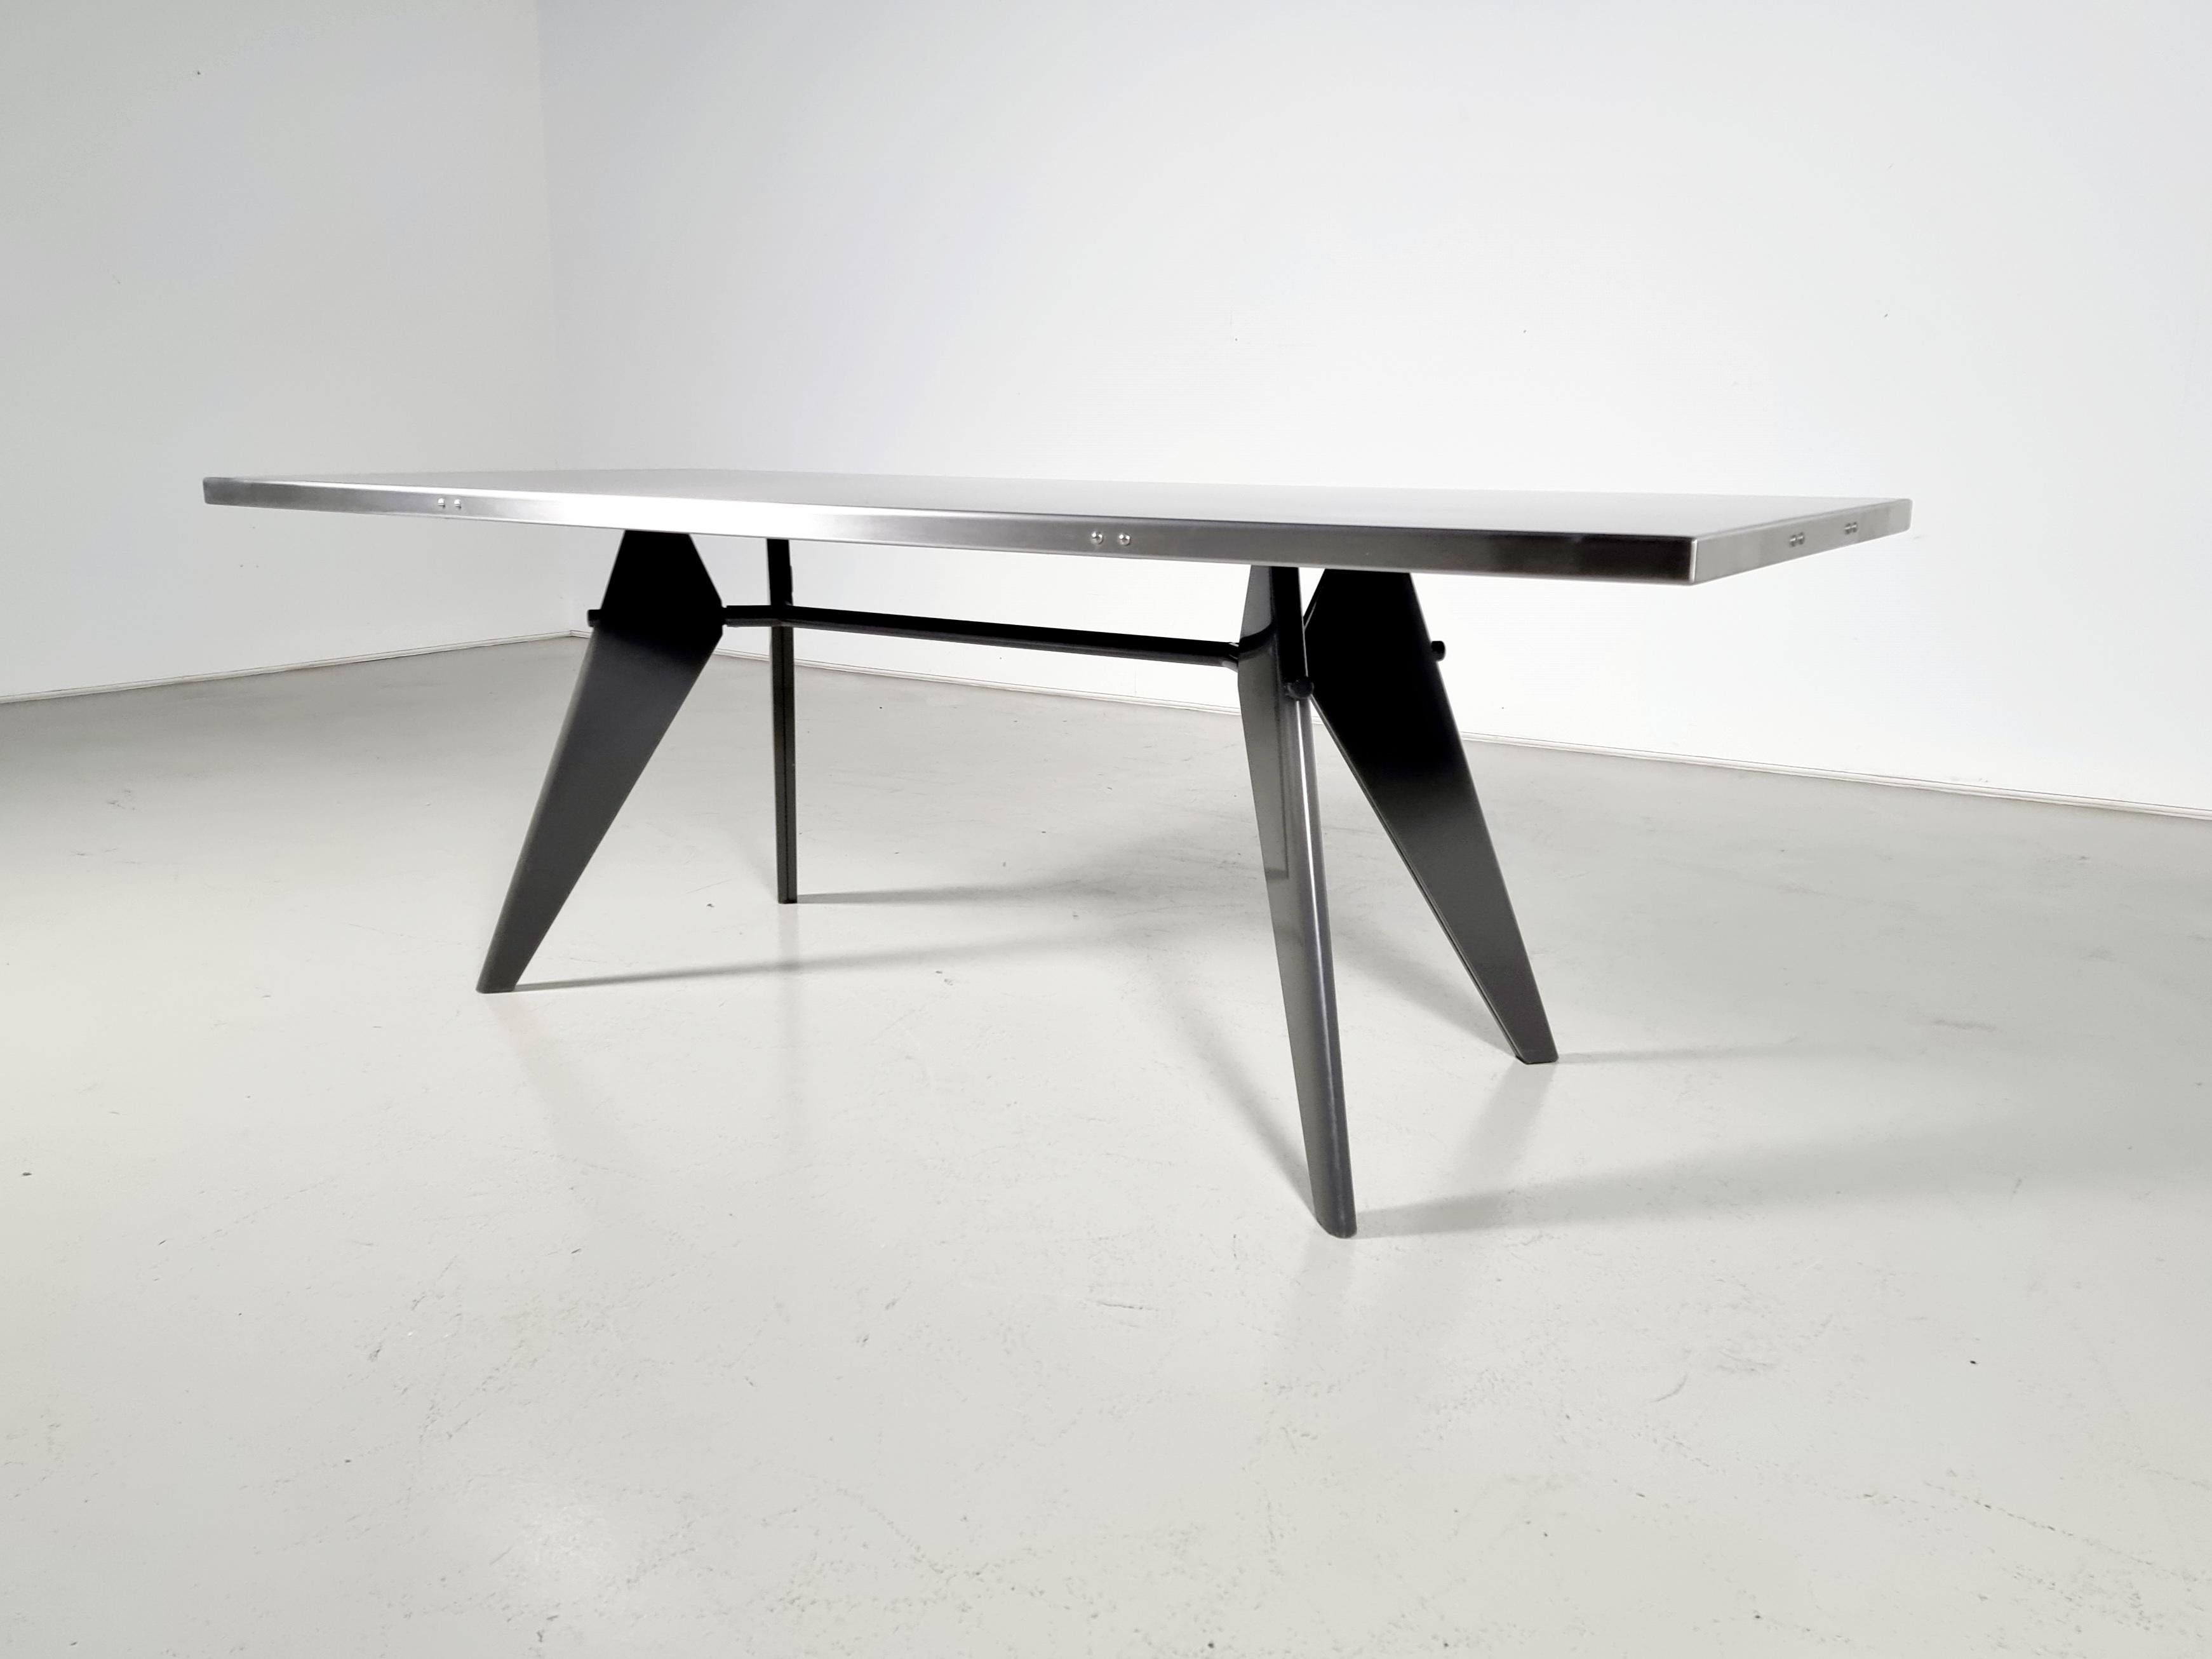 Steel Jean Prouve by G-Star Raw for Vitra S.A.M. Tropique Table with matching chairs